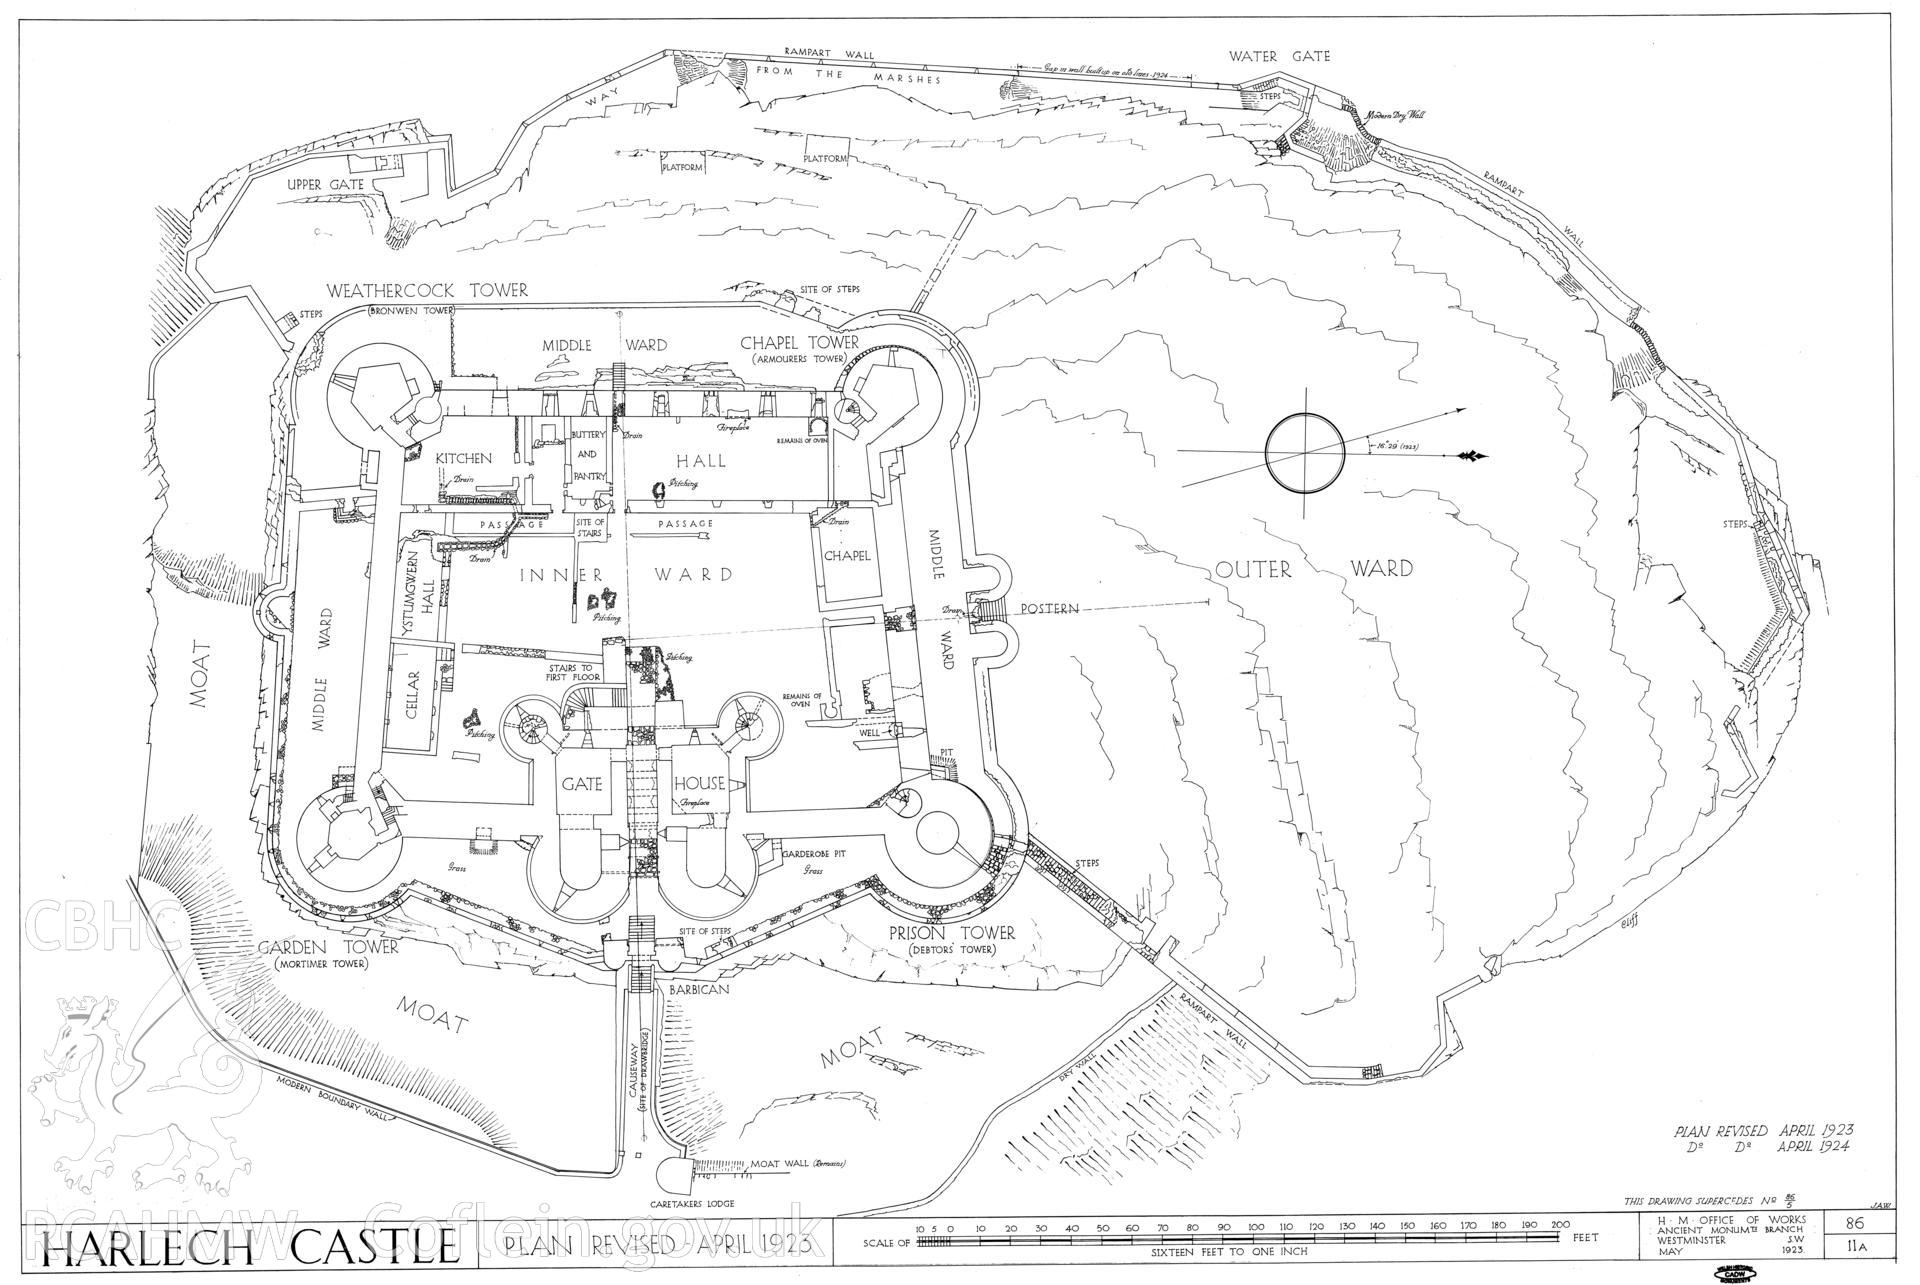 Cadw guardianship monument drawing of Harlech Castle. Castle with outer ward (outline). Cadw Ref. No:86/11A. Scale 1:192.